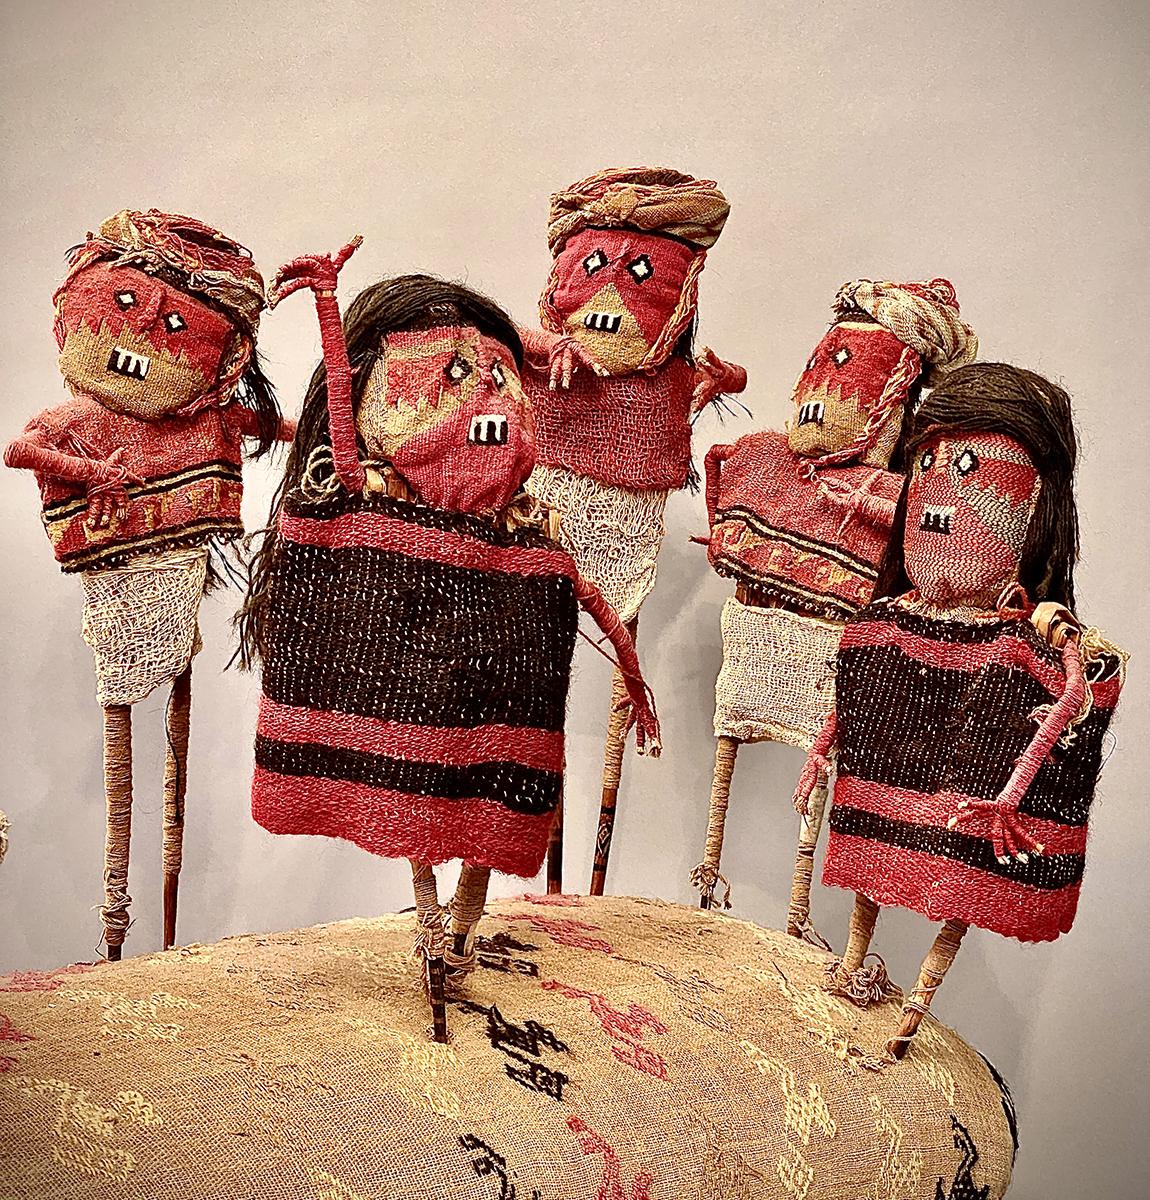 Group of dolls arranged in a ceremonial scene, from a dry tomb. Peru, Chancay culture, 900-1400 AD.jpg